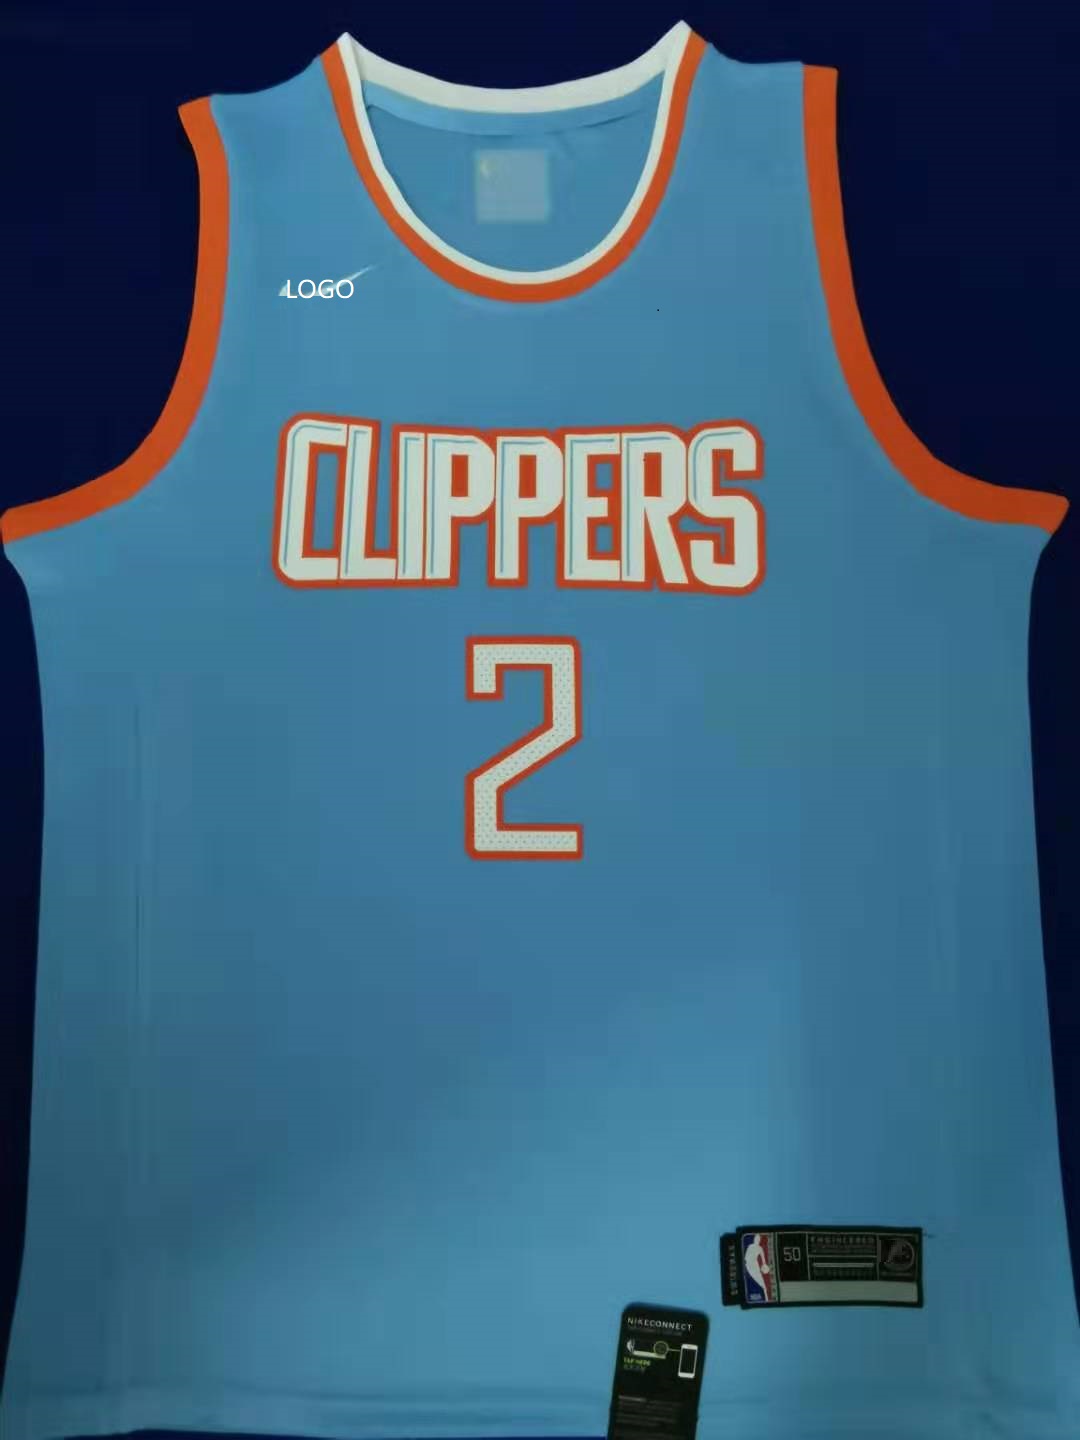 clippers uniforms 2019